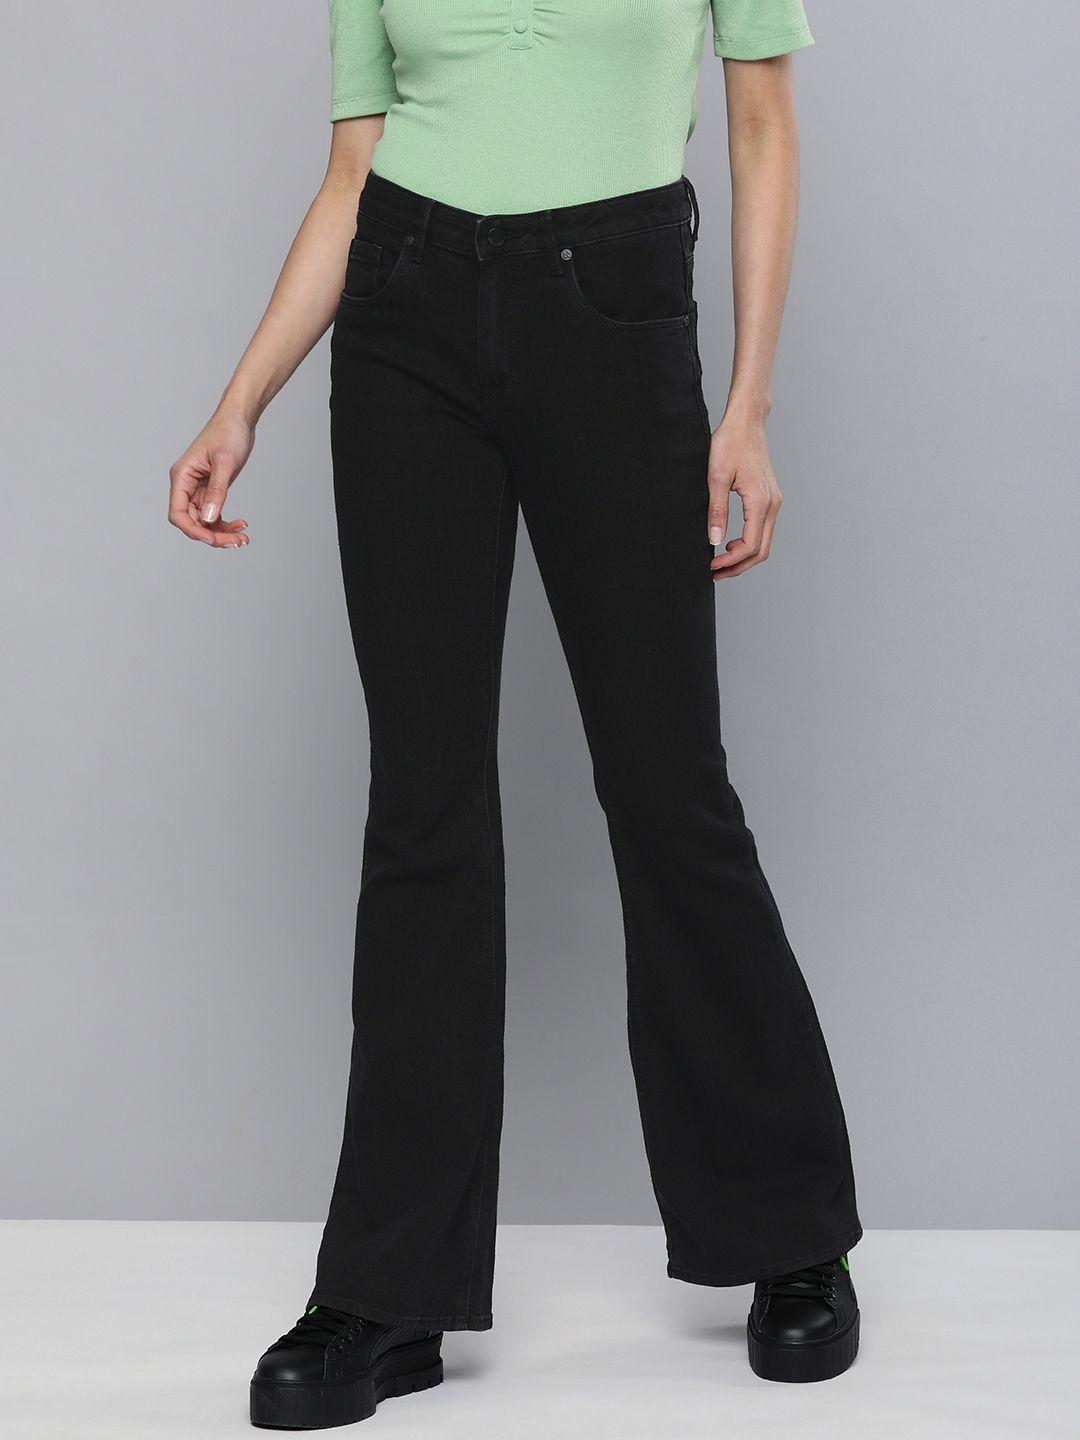 here&now women black high-rise clean look flared jeans